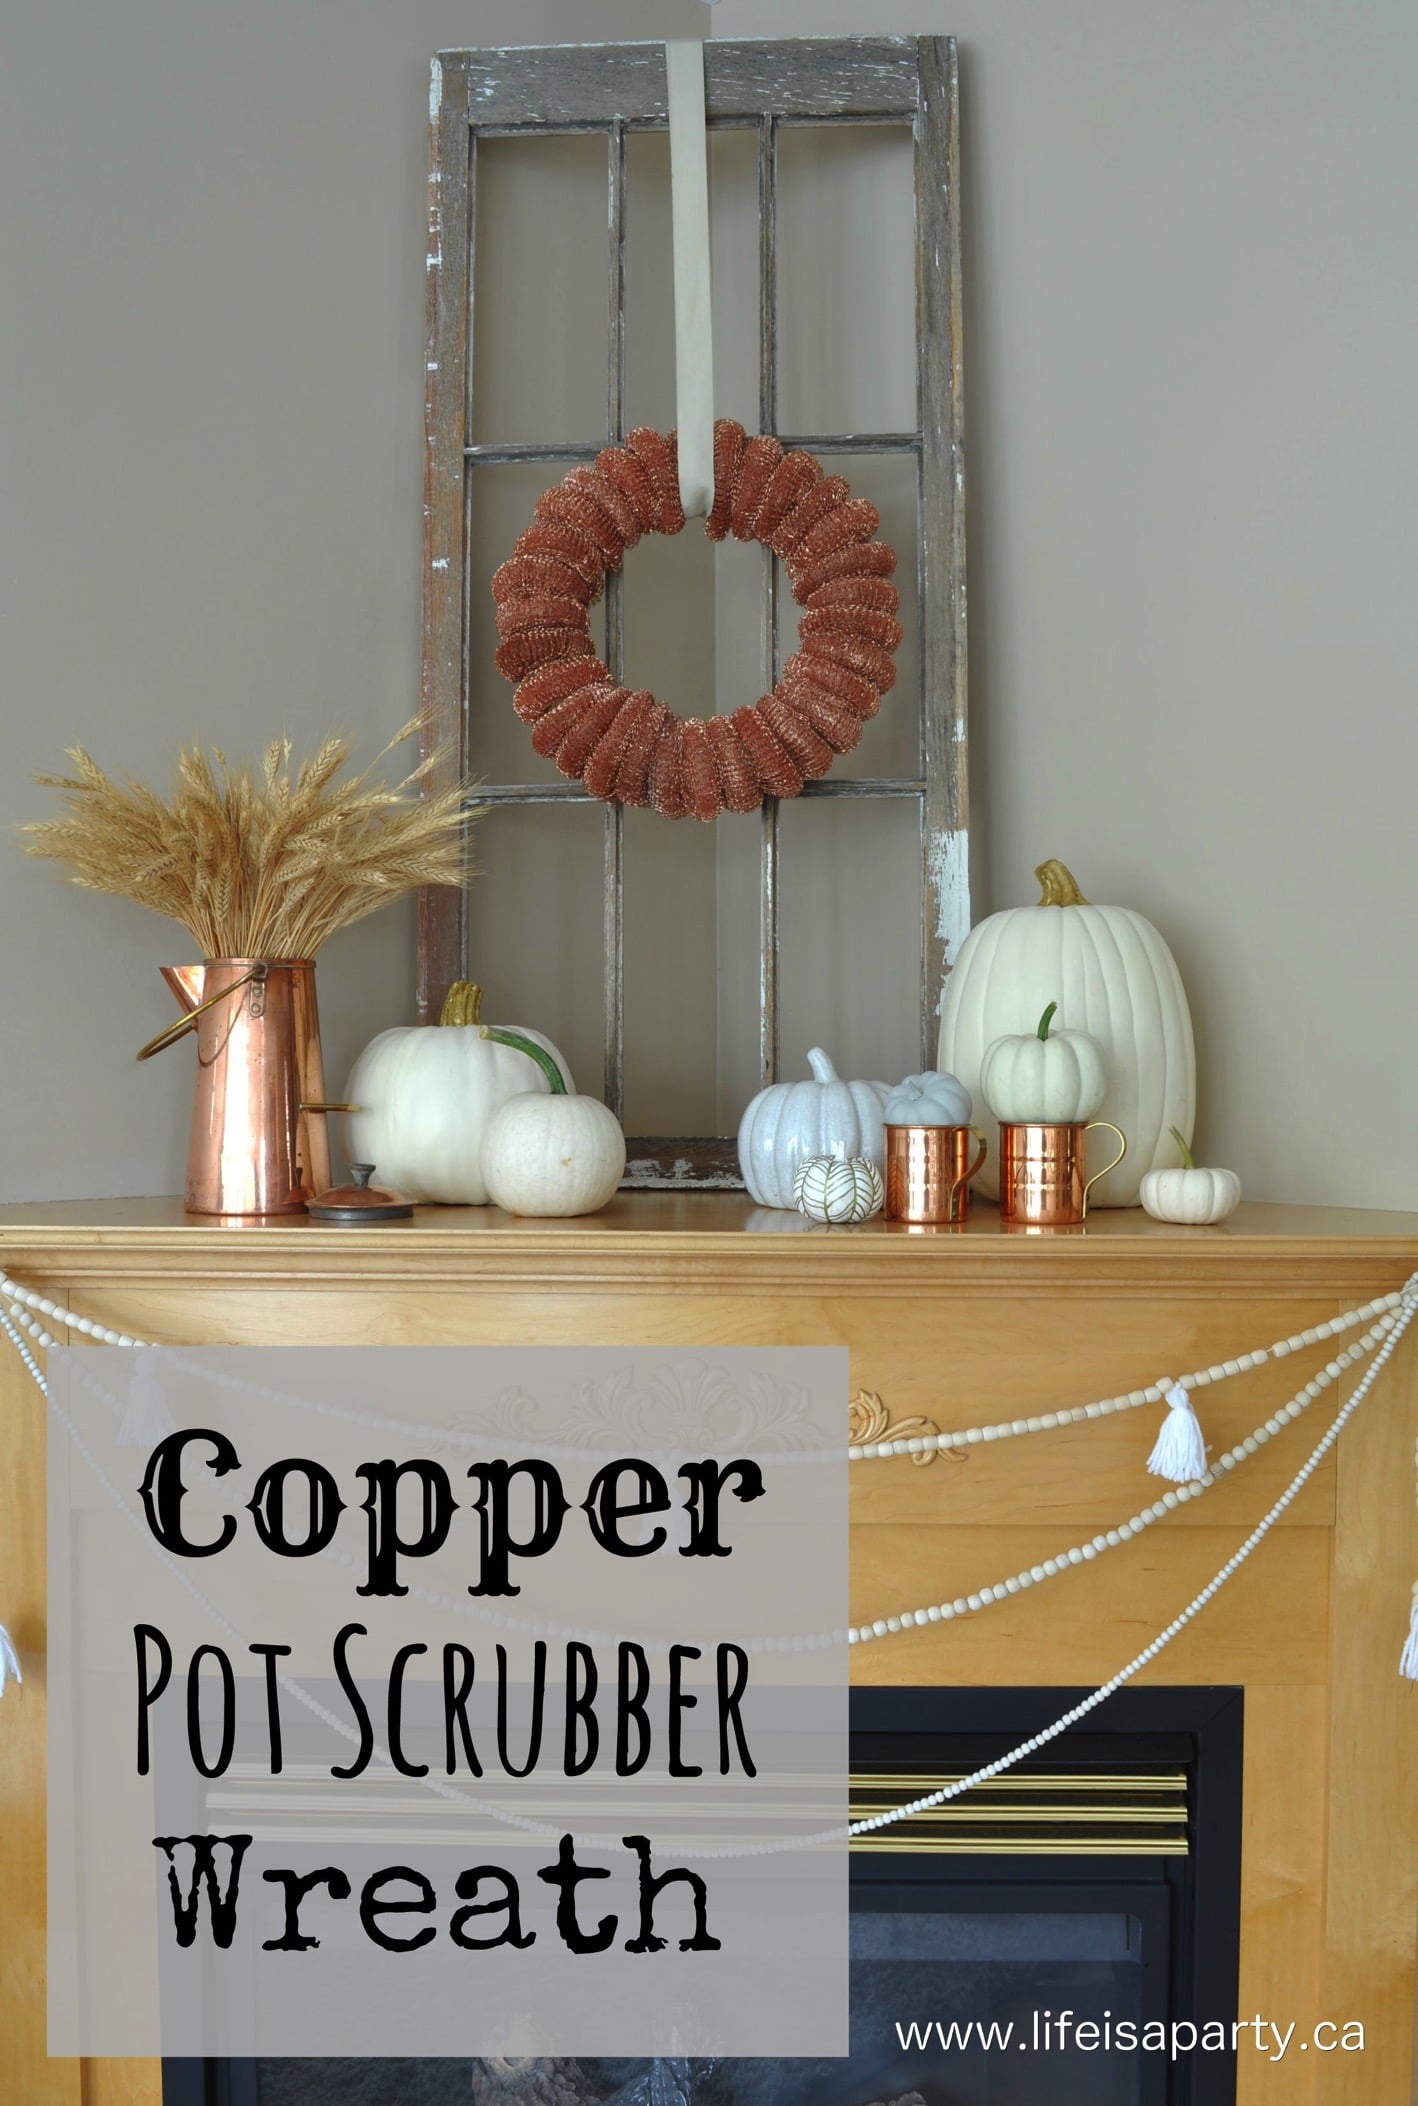 Copper Pot Scrubber Wreath: Simple DIY for a beautiful copper wreath made from dollar store pot scrubbers.